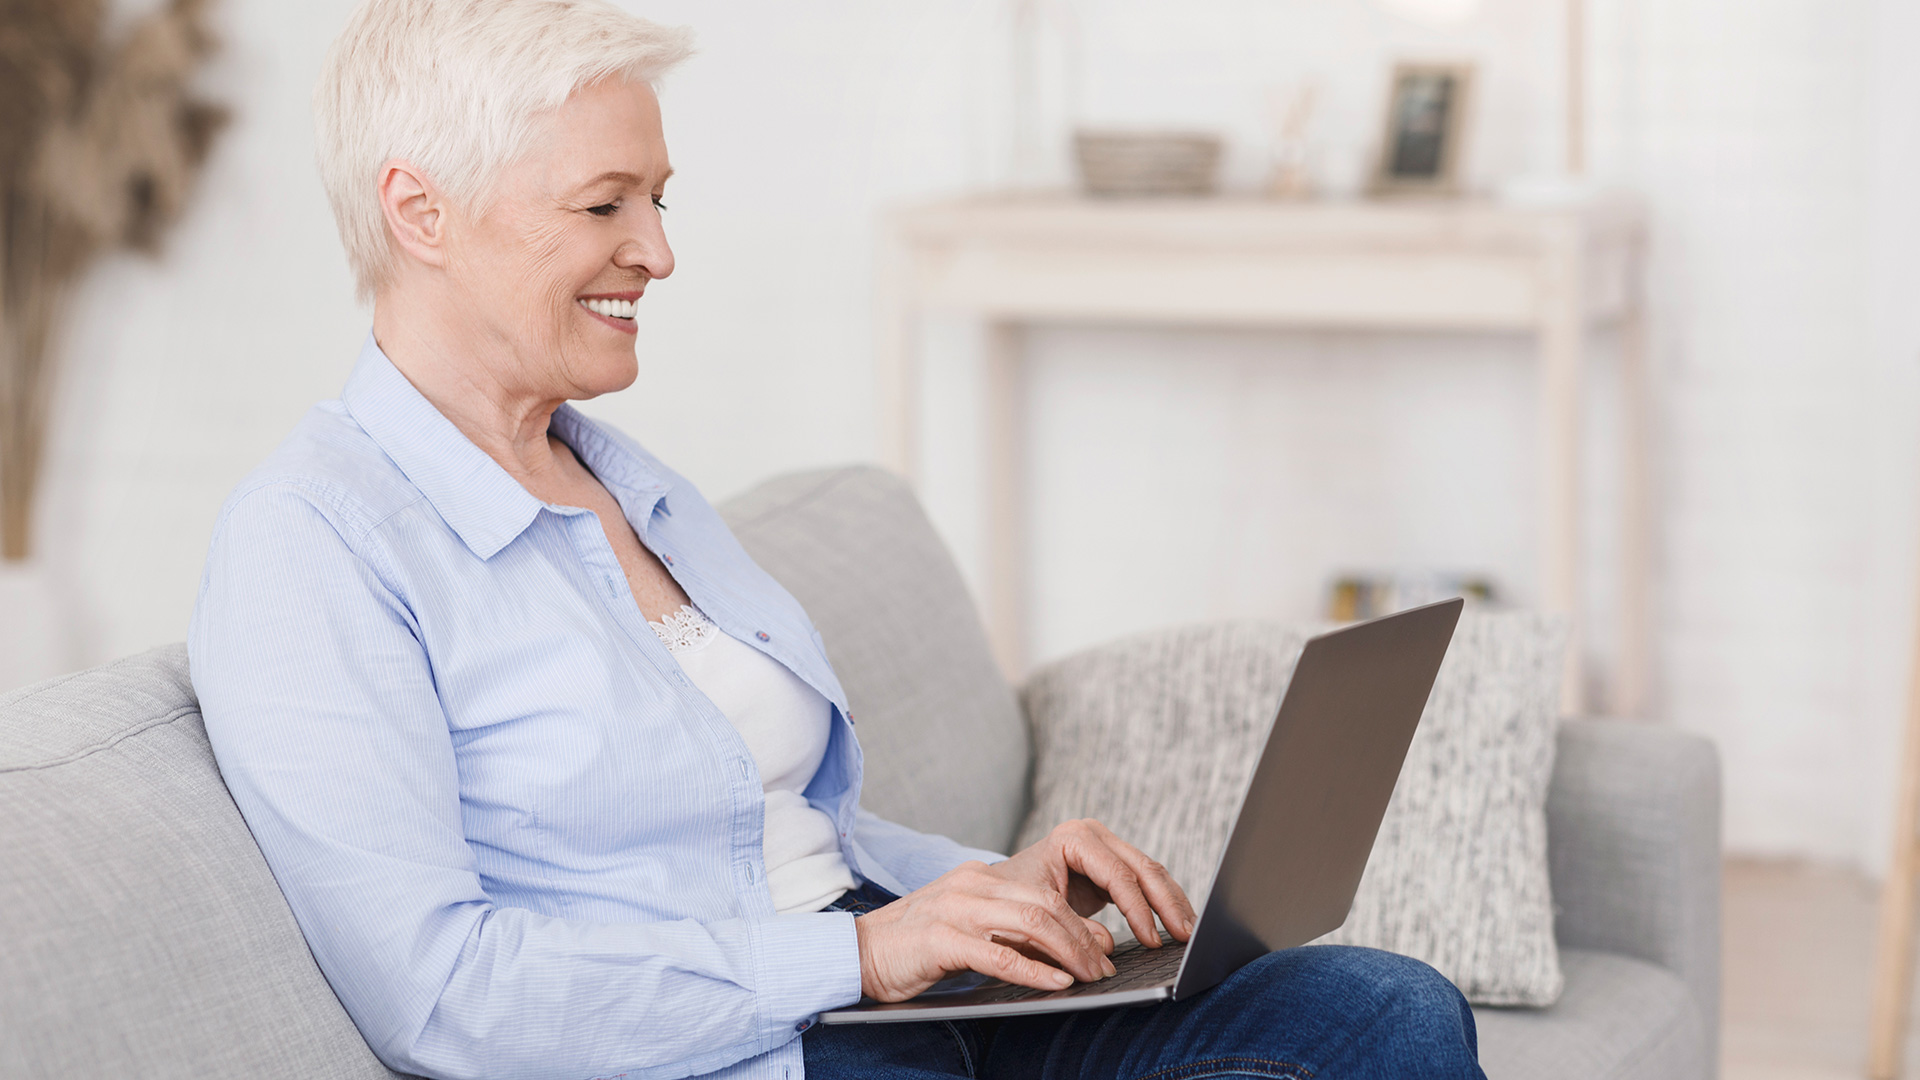 Older woman with short white hair and light blue shirt sitting down on couch with laptop on lap and smiling while typing.